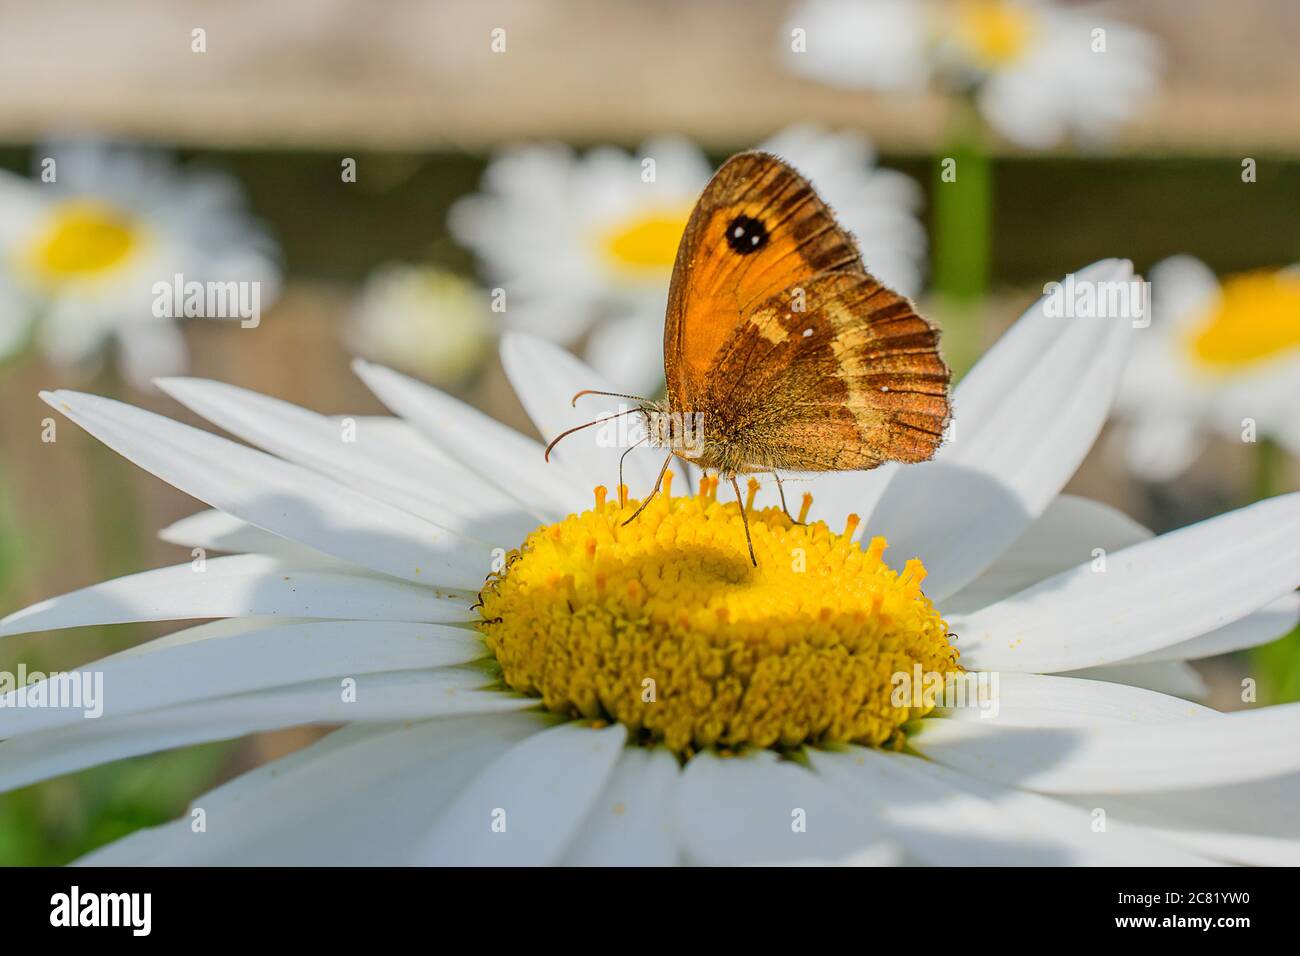 A colourful close up macro of a Gatekeeper butterfly feeding on a bright yellow daisy flower Stock Photo